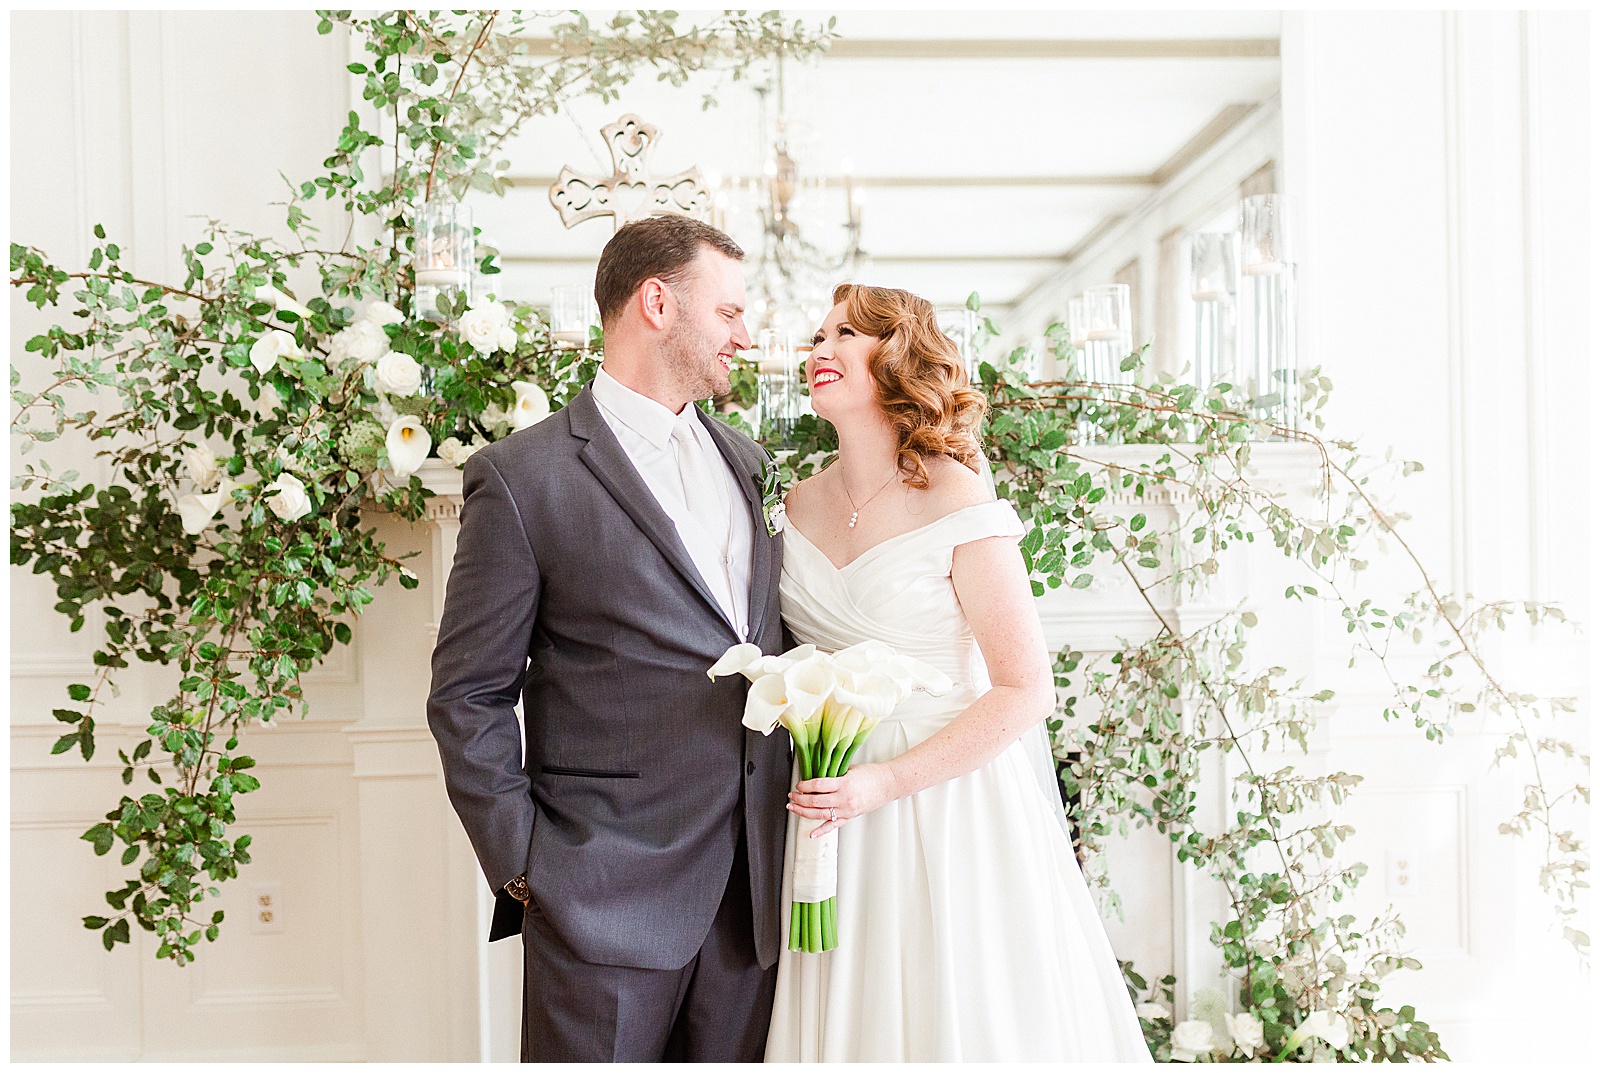 Gorgeous Bride Groom Portraits at elegant indoor floral venue in 1940s Modern Vintage Wedding in Charlotte, NC | check out the full wedding at KevynDixonPhoto.com